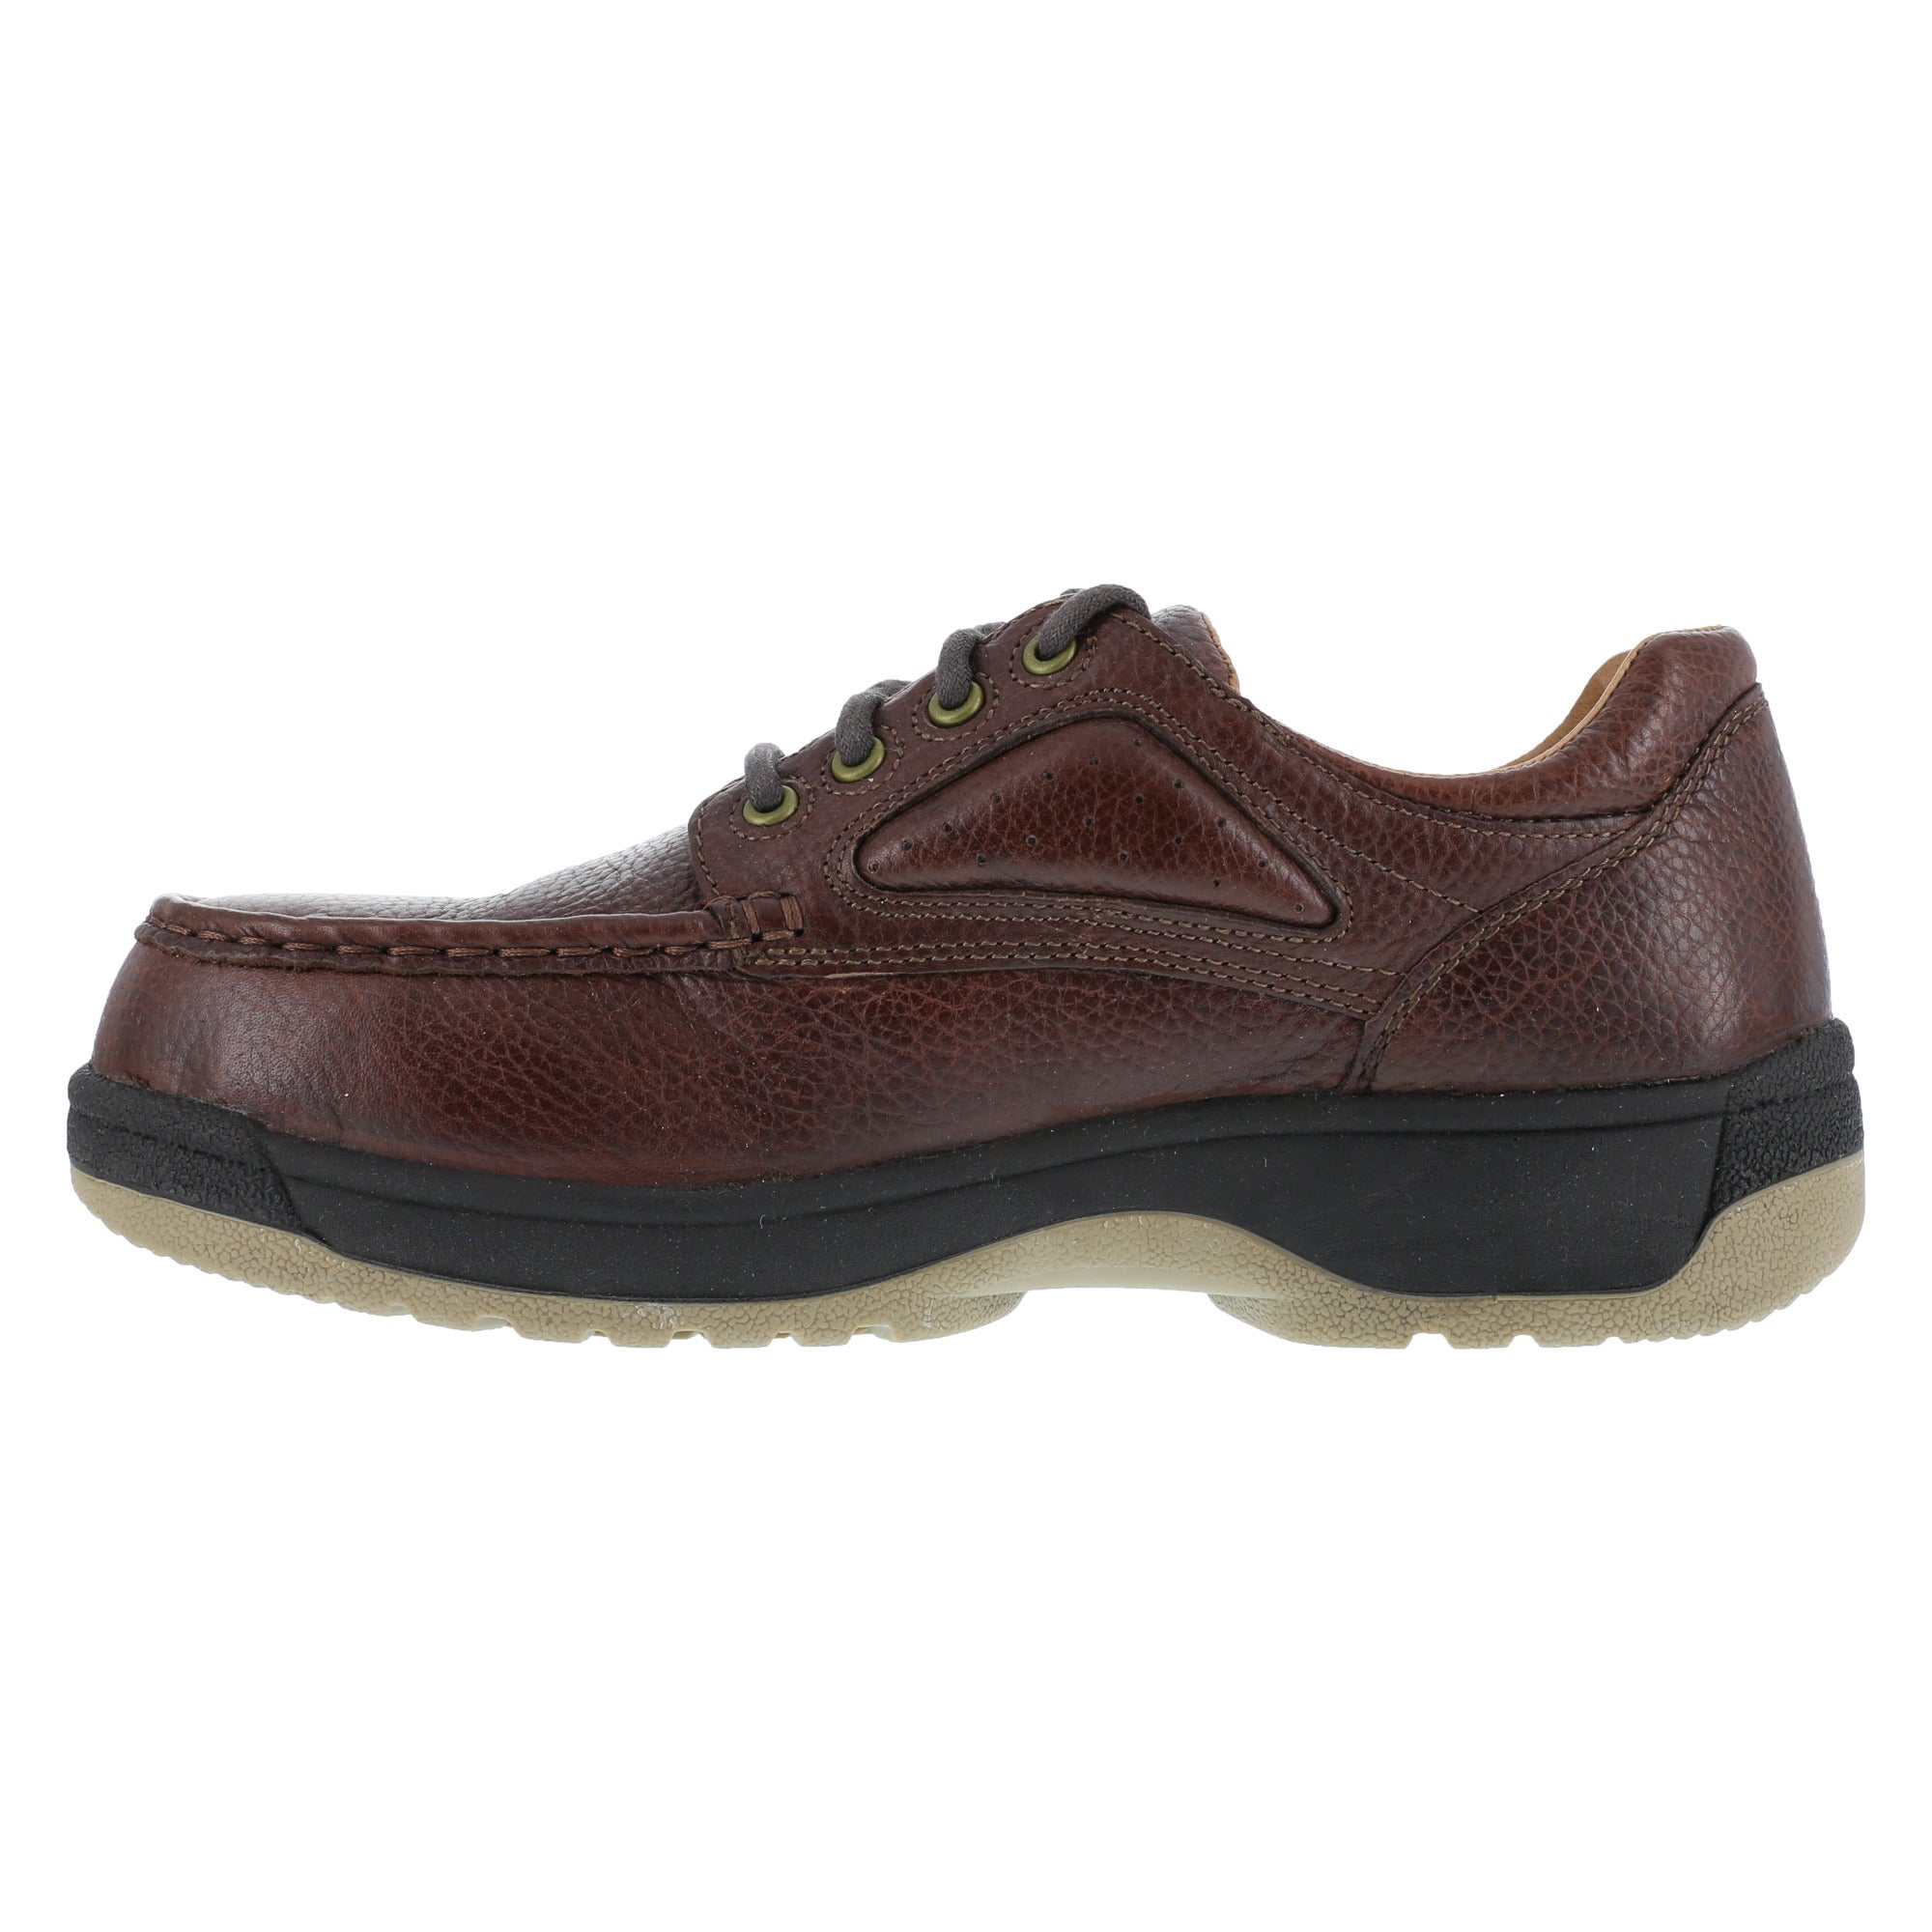 Florsheim Womens Brown Leather Casual Moc Oxford Compadre Steel Toe ...